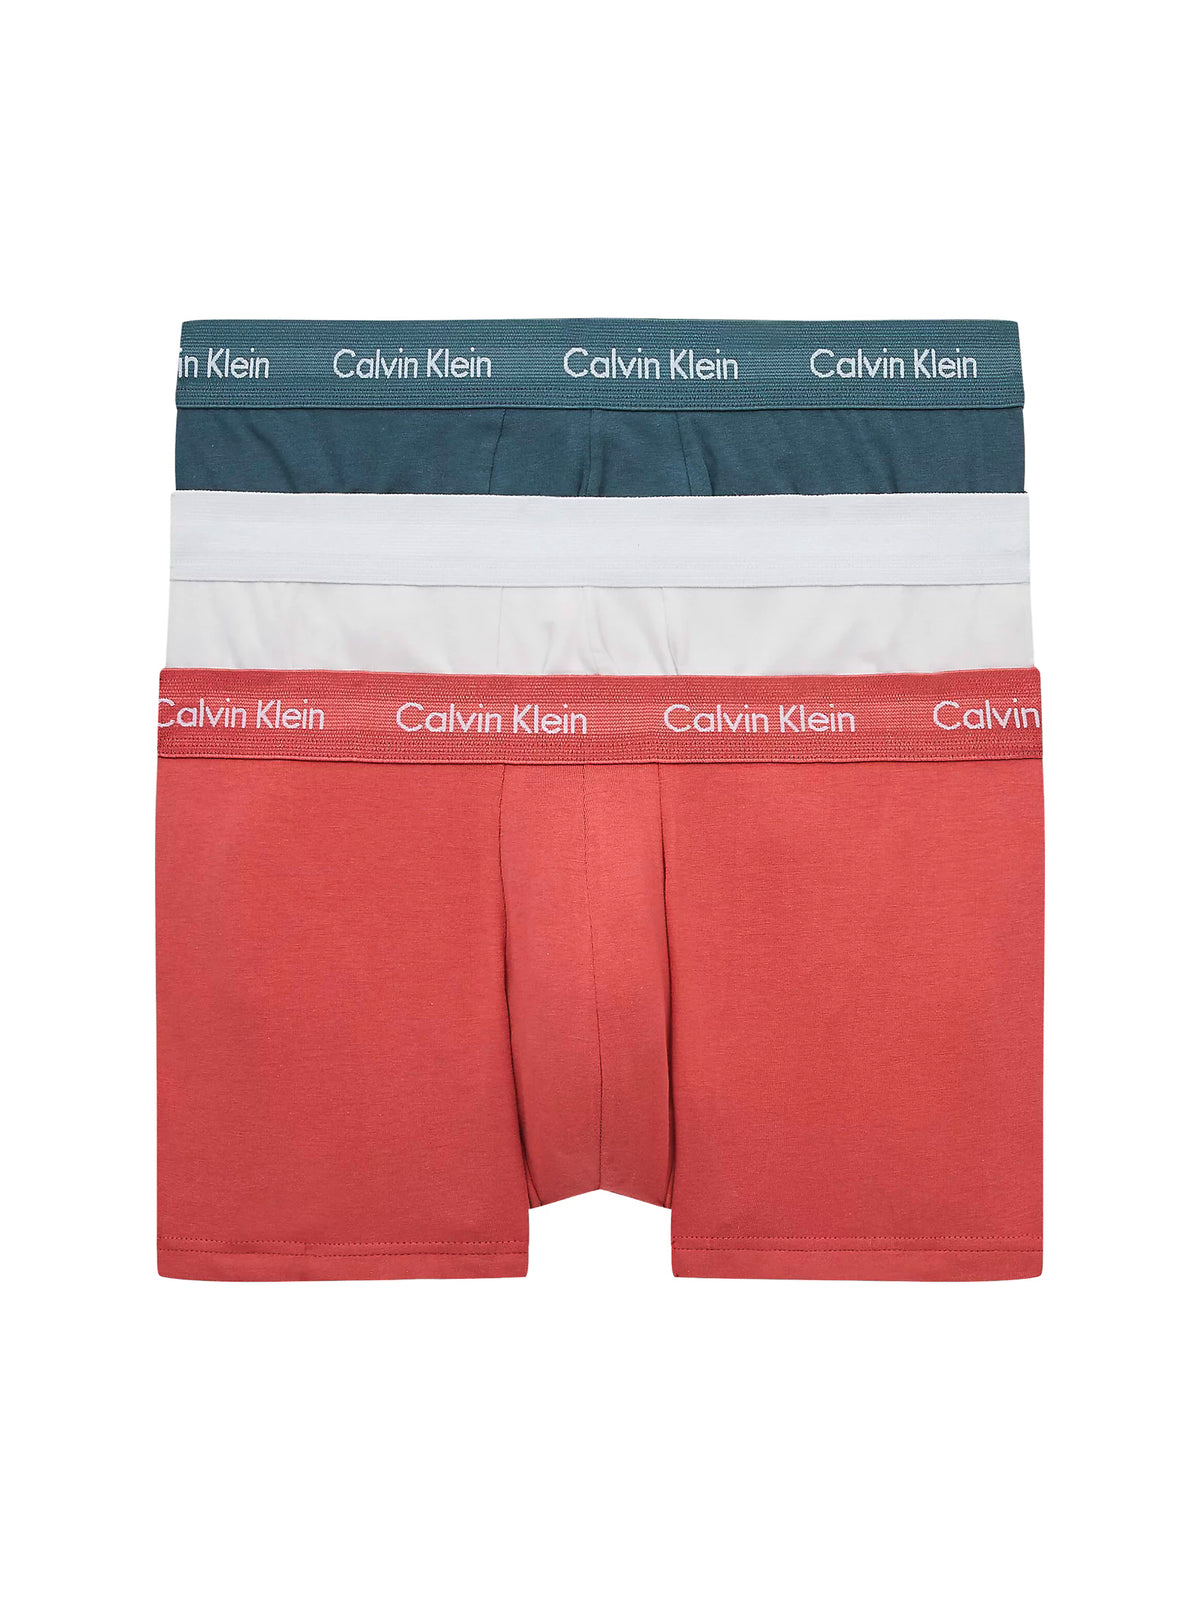 Mens Calvin Klein Boxer Shorts Low Rise Trunks 3 Pack, 01, U2664G, Dusty Cppr/ Bright Wht/ Hsphr Blue